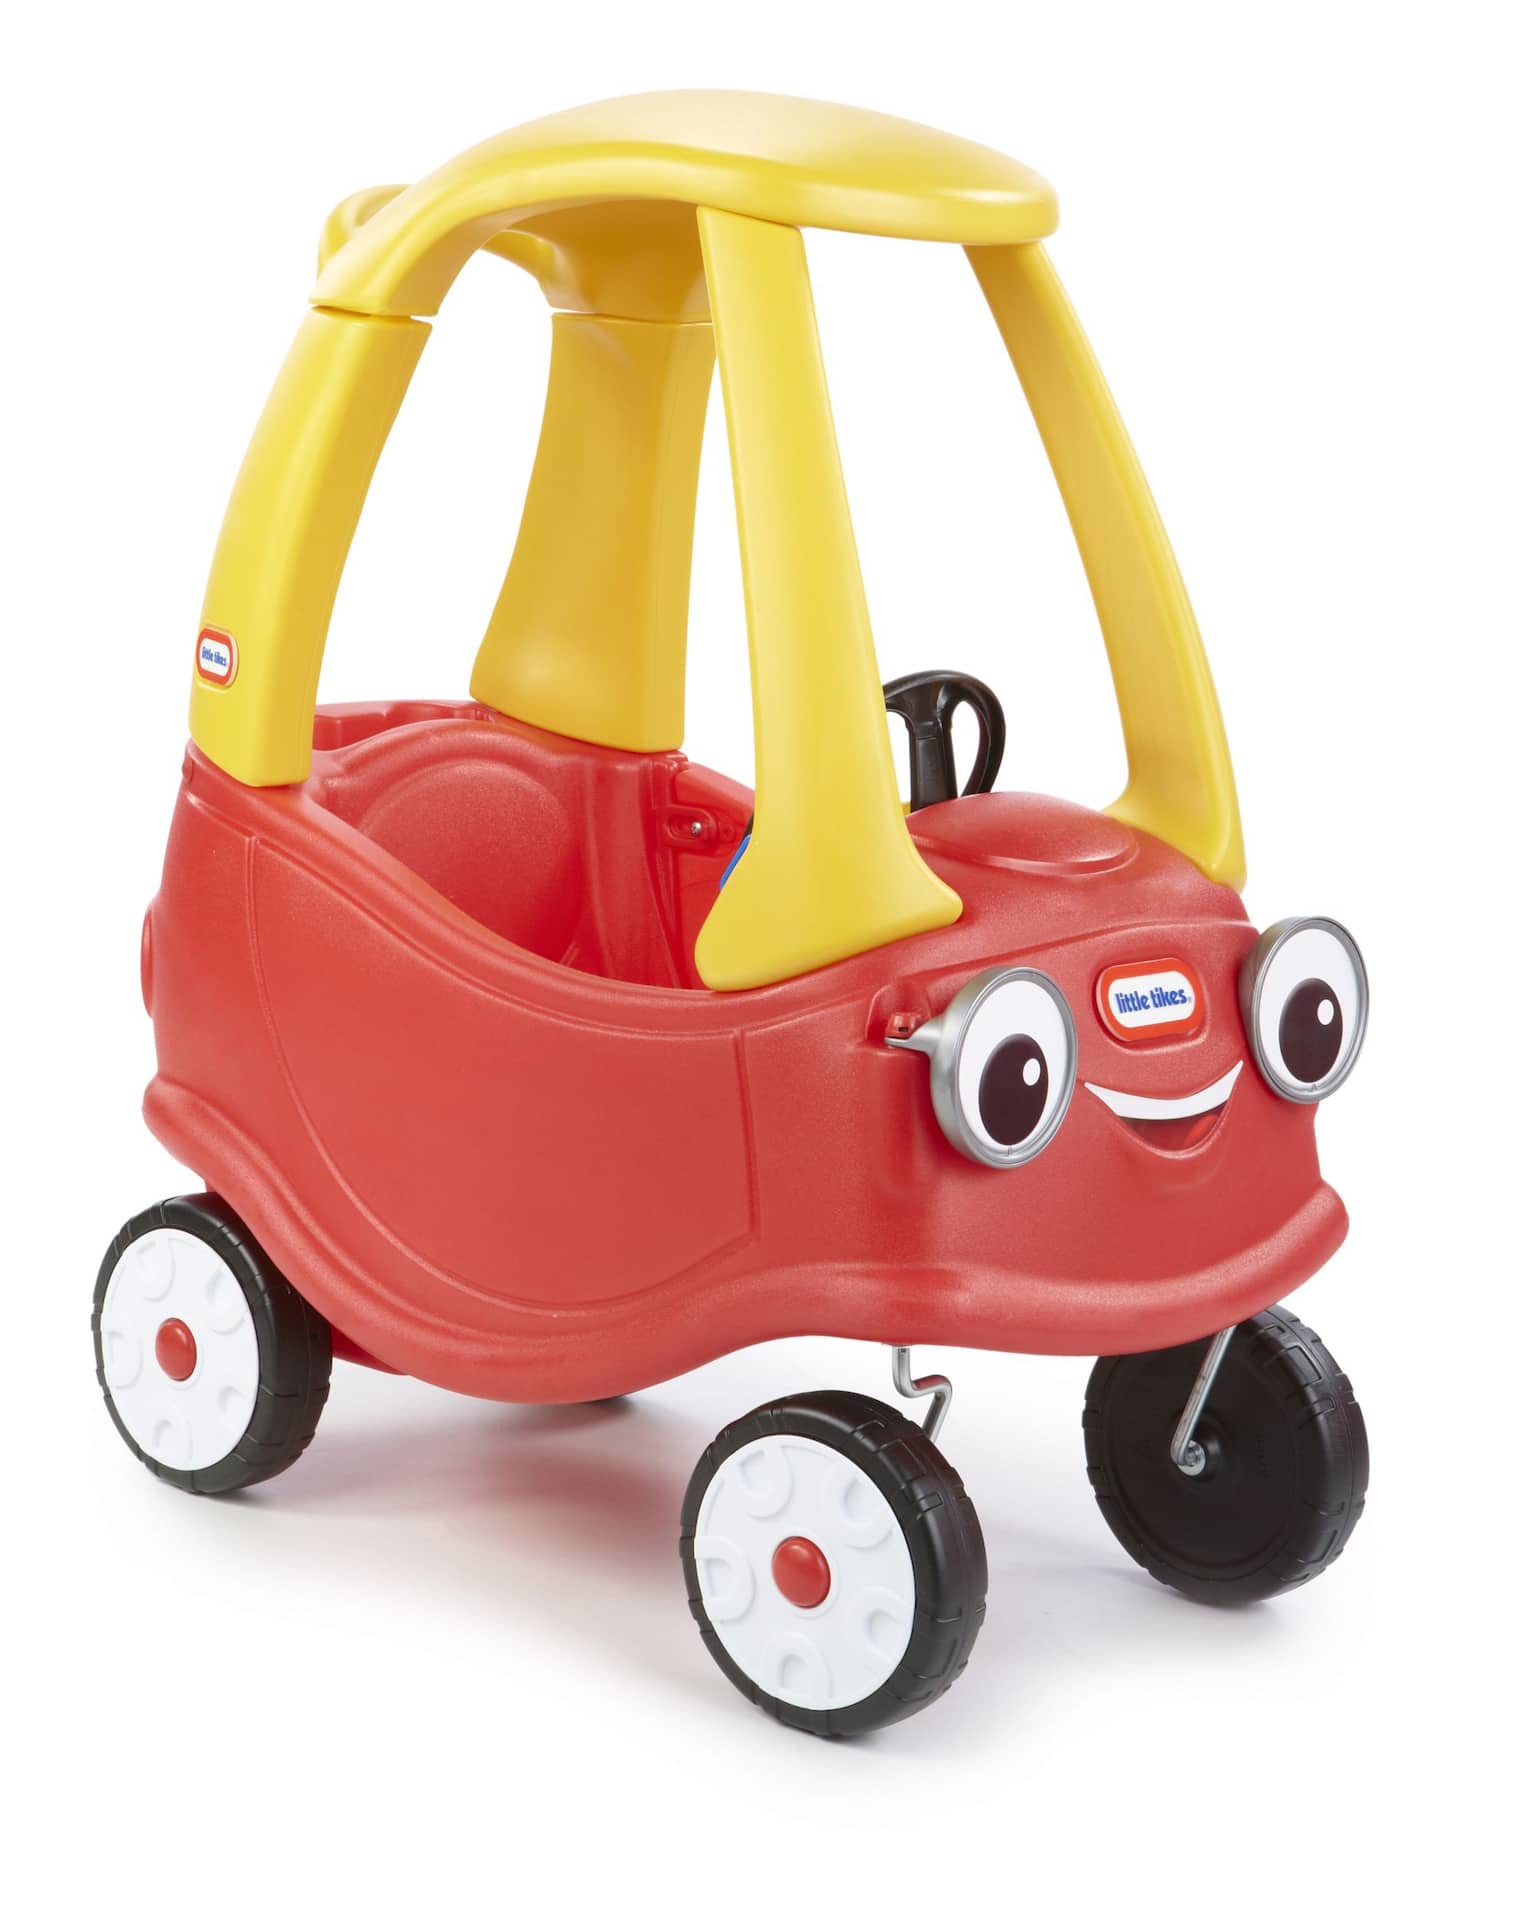 Little Tikes Cozy Coupe Ride-On Interactive Toy For Kids, Ages 1.5